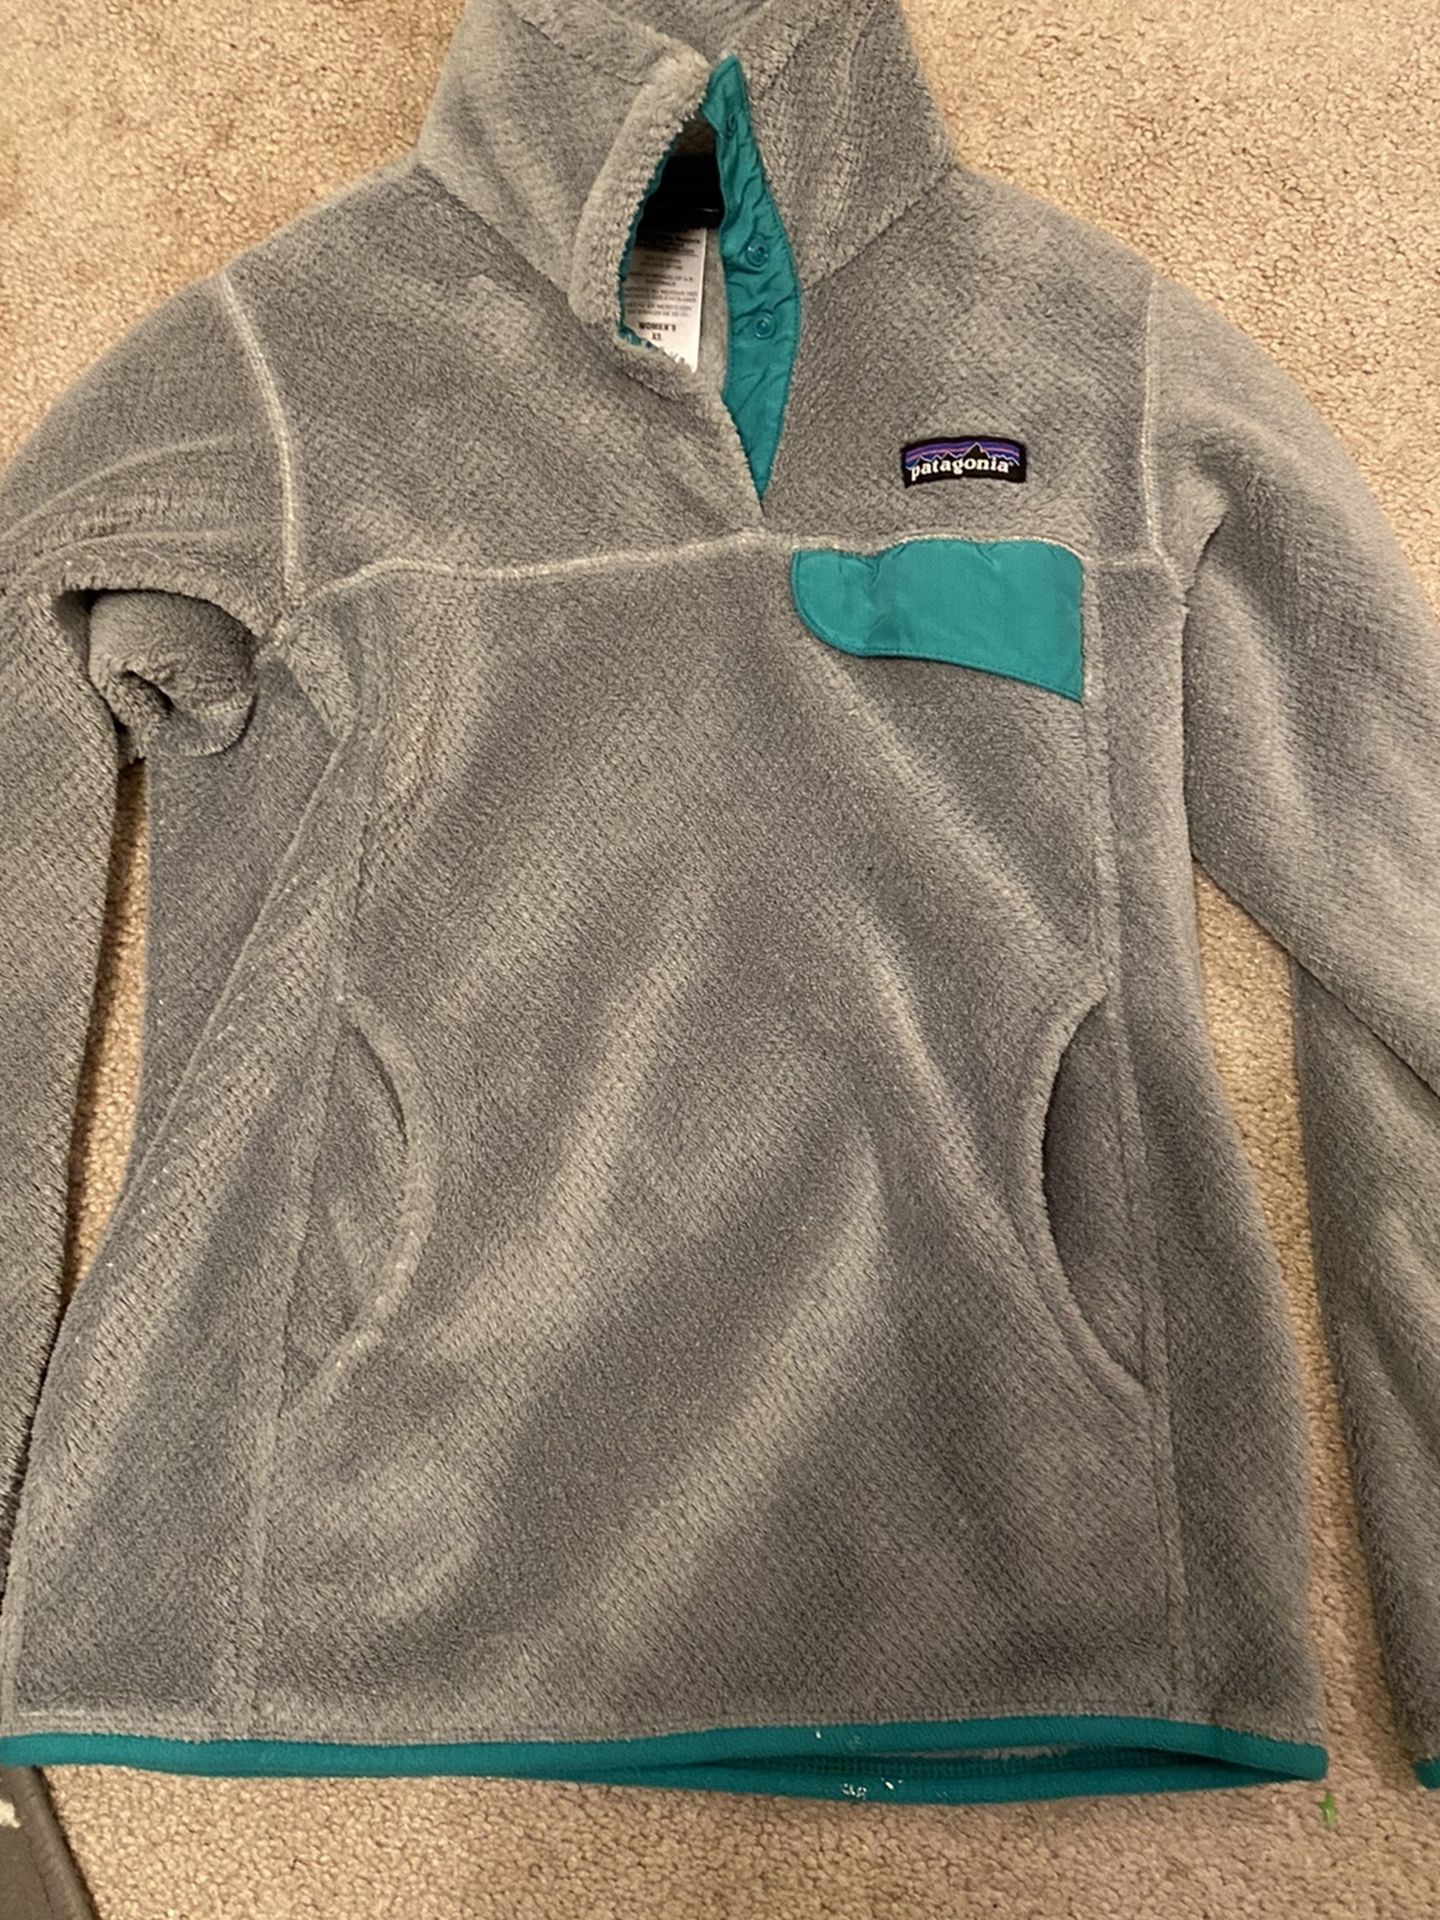 Patagonia Pullover (XS)